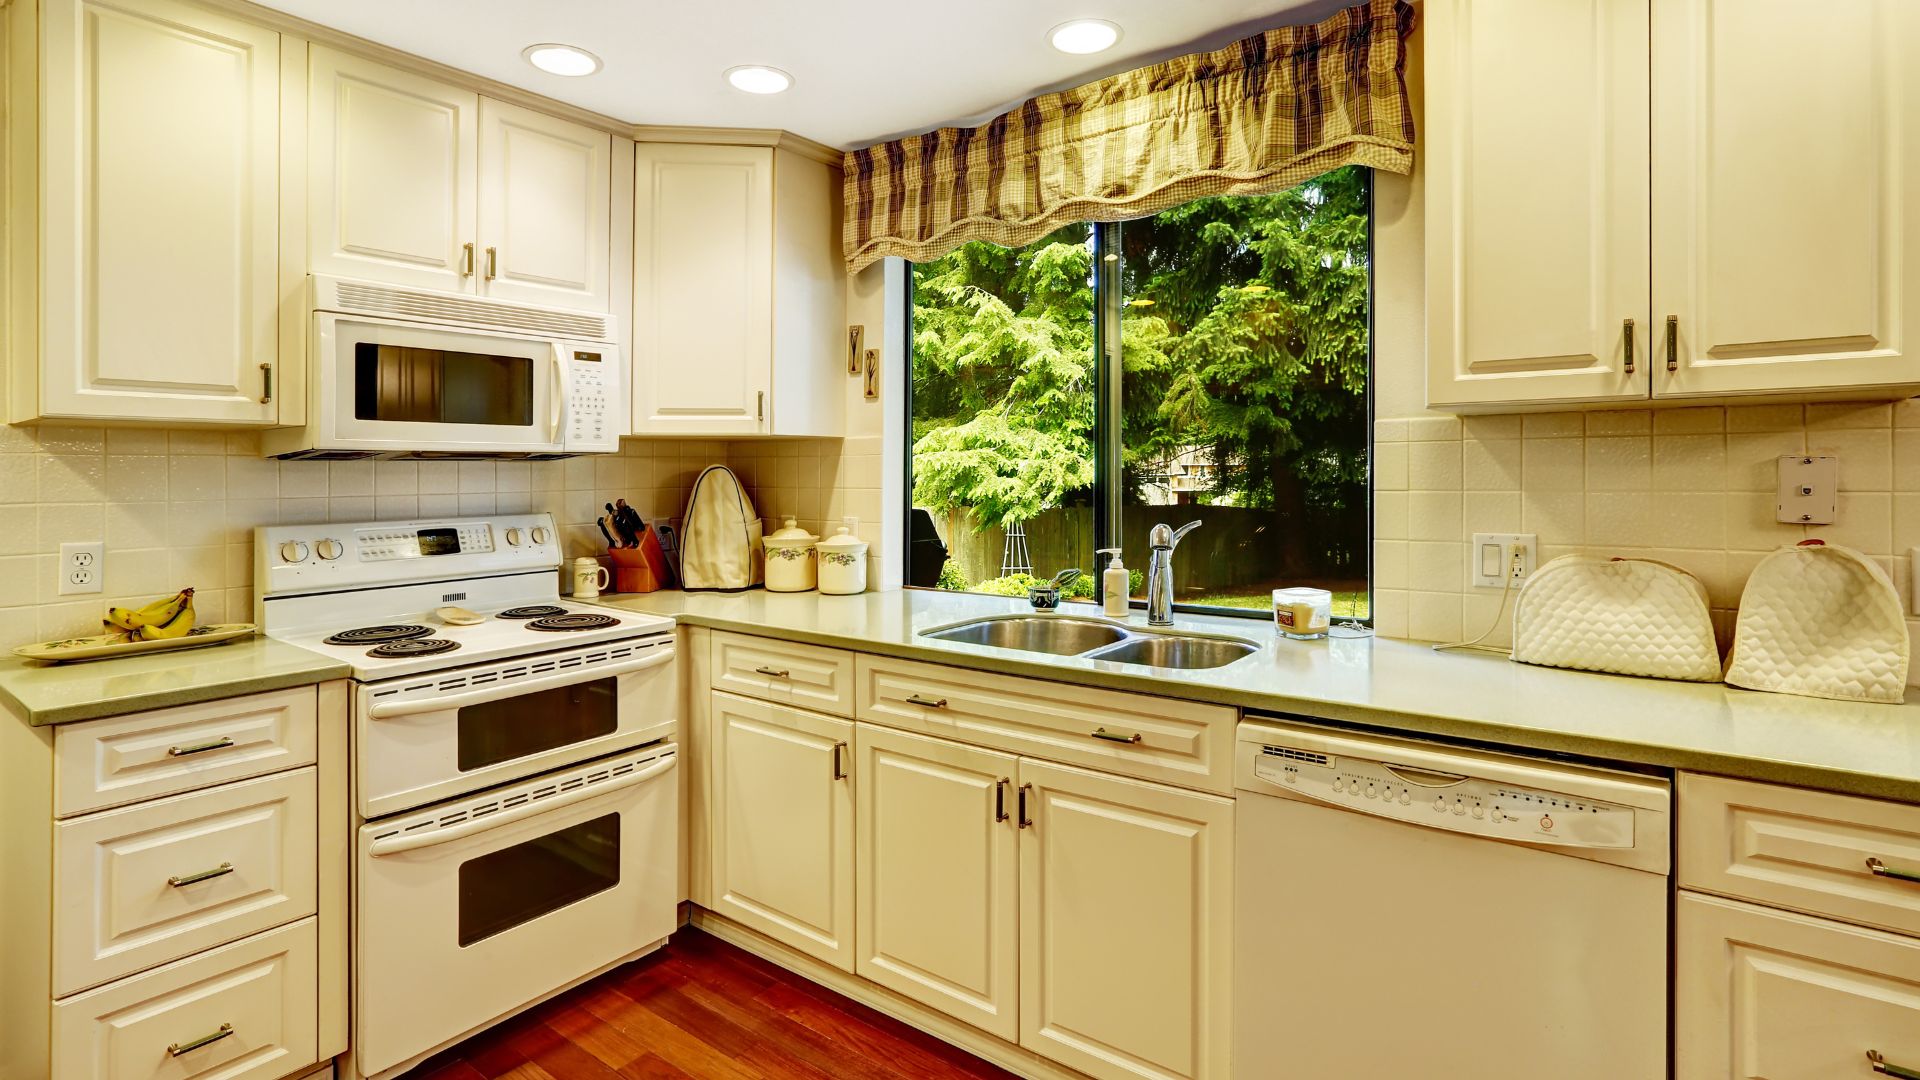 Old World Kitchen style in cream cabinets and countertop